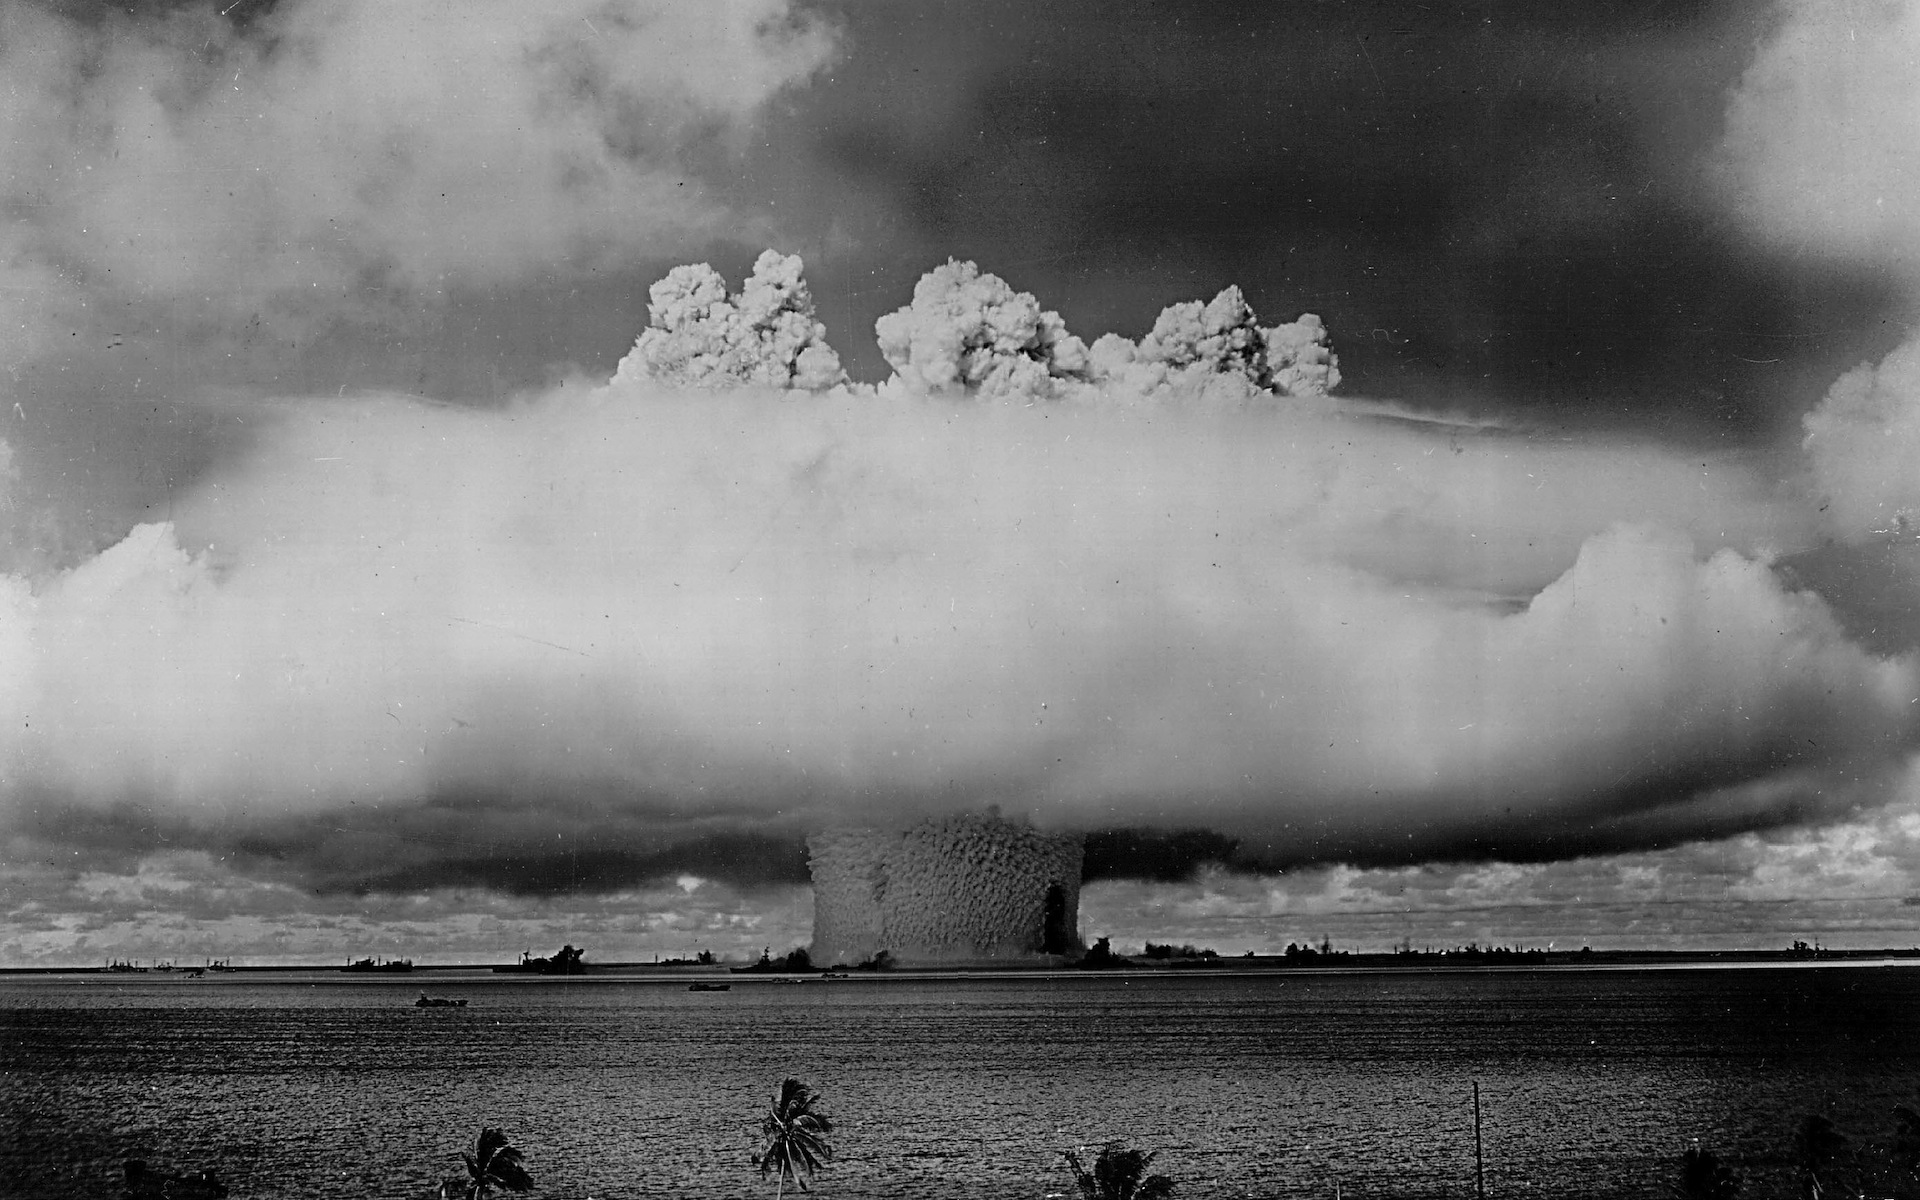 379631 08: Atomic cloud rises July 25, 1946 during the "Baker Day" blast at Bikini Island in the Pacific. (Photo by National Archive/Newsmakers)